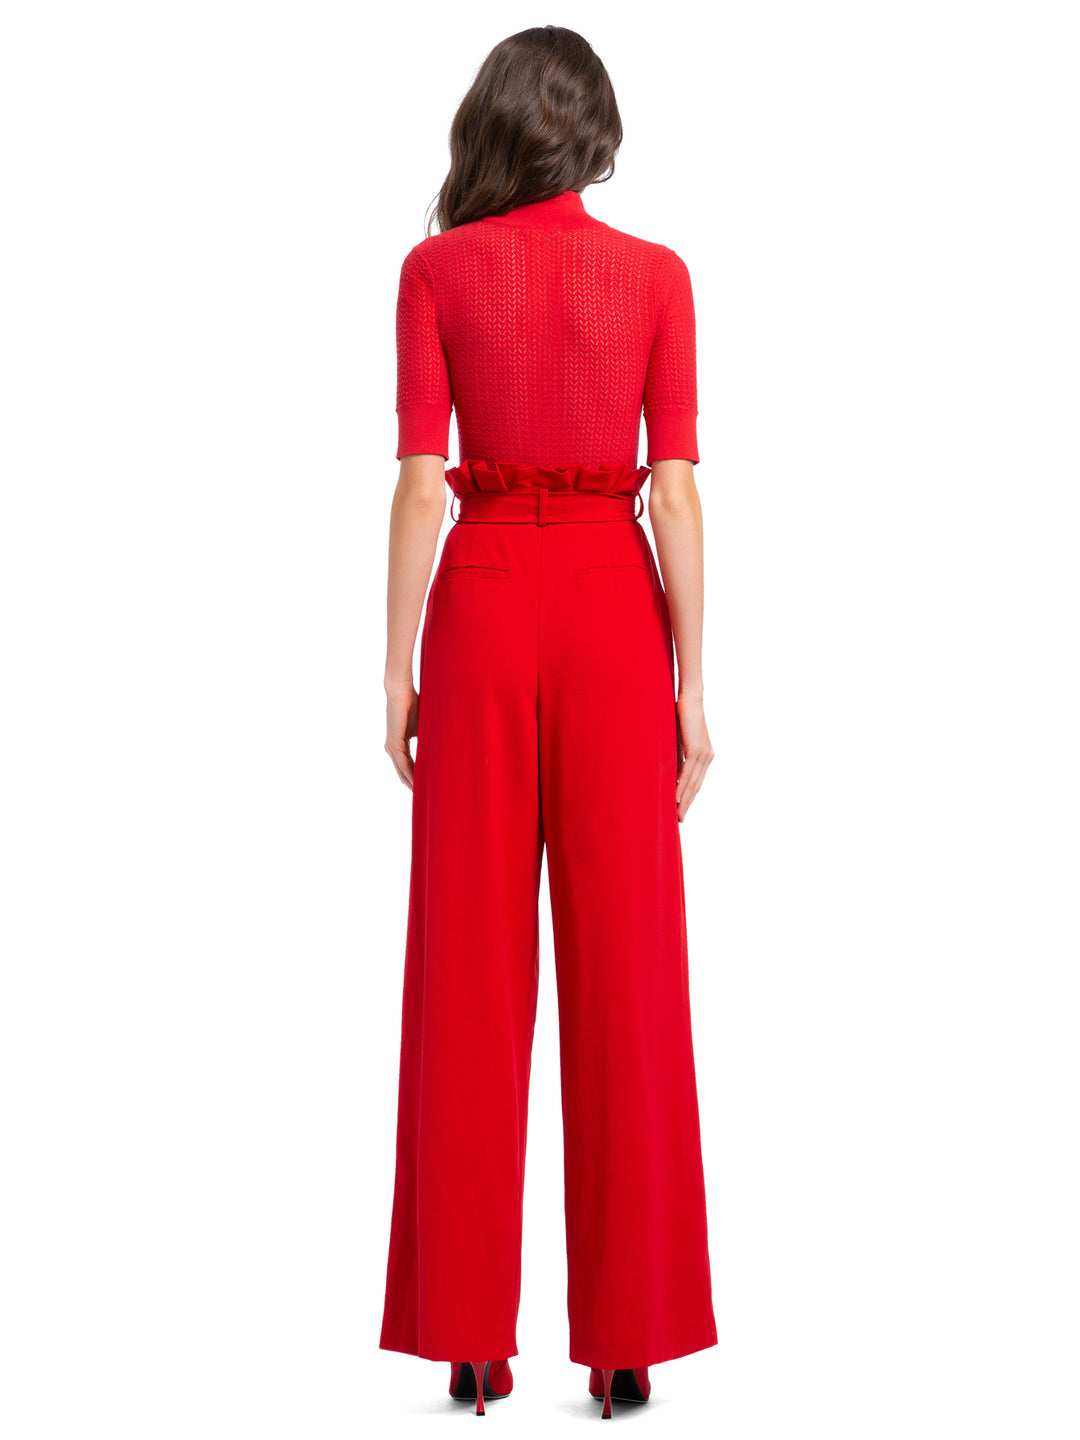 Alice + Olivia- Farrel Paper Bag Pleated Pants in Cherry